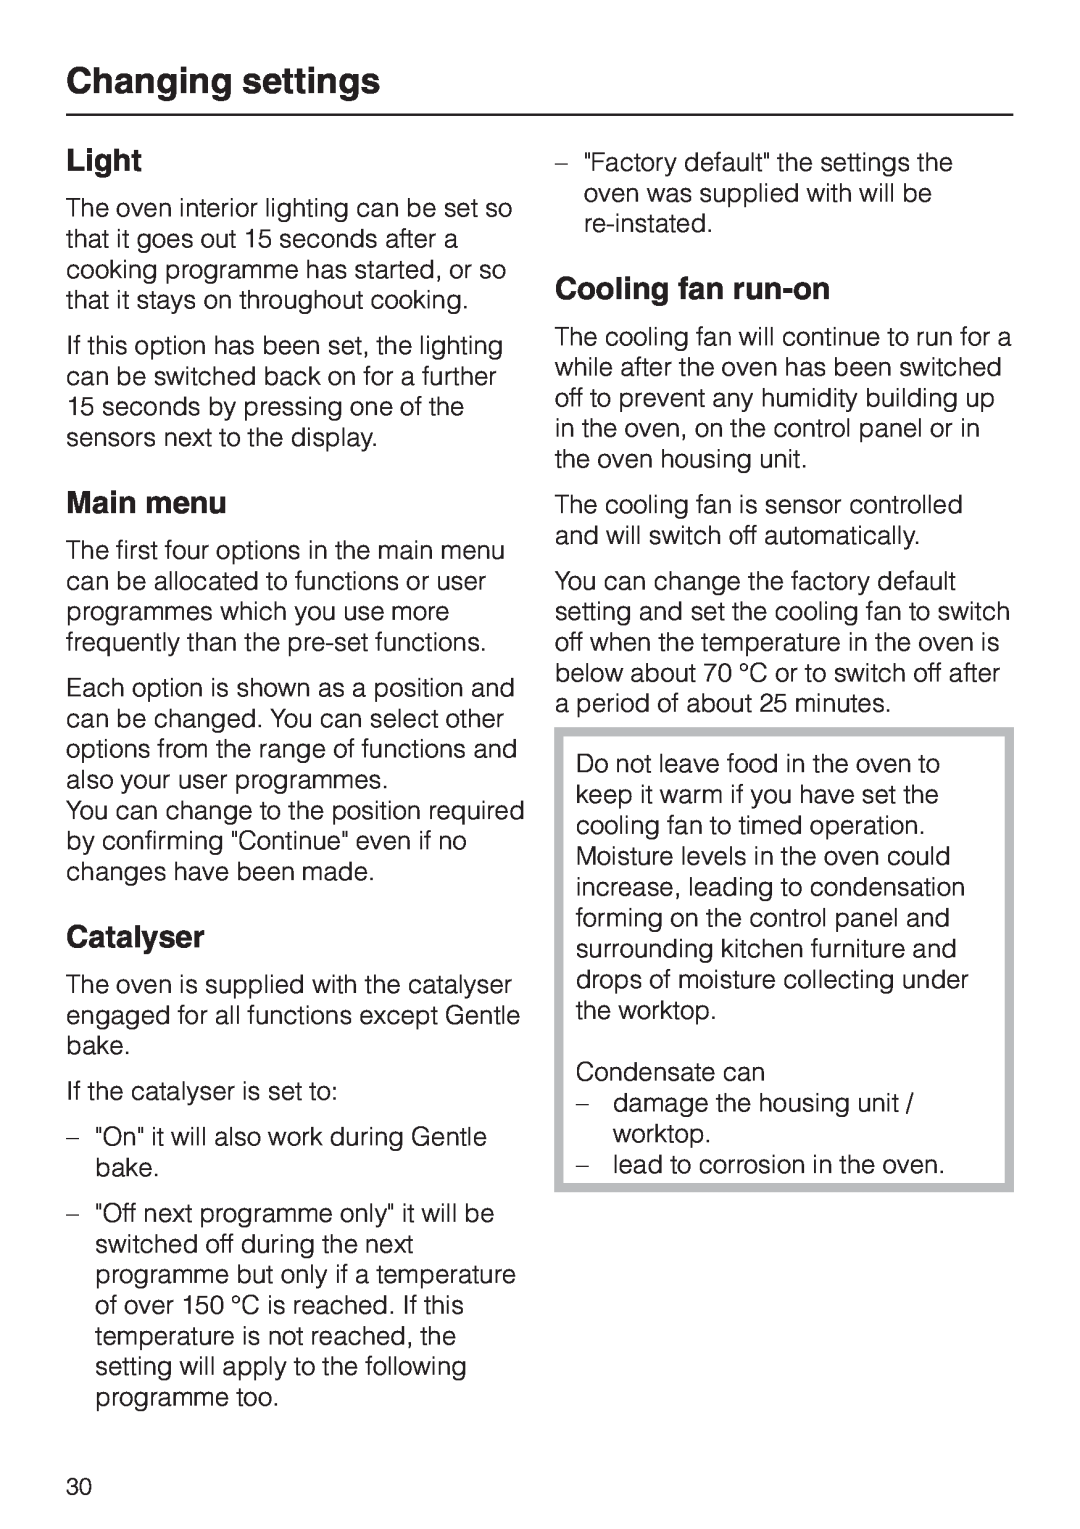 Miele H 4681 installation instructions Light, Main menu, Catalyser, Cooling fan run-on, Changing settings 